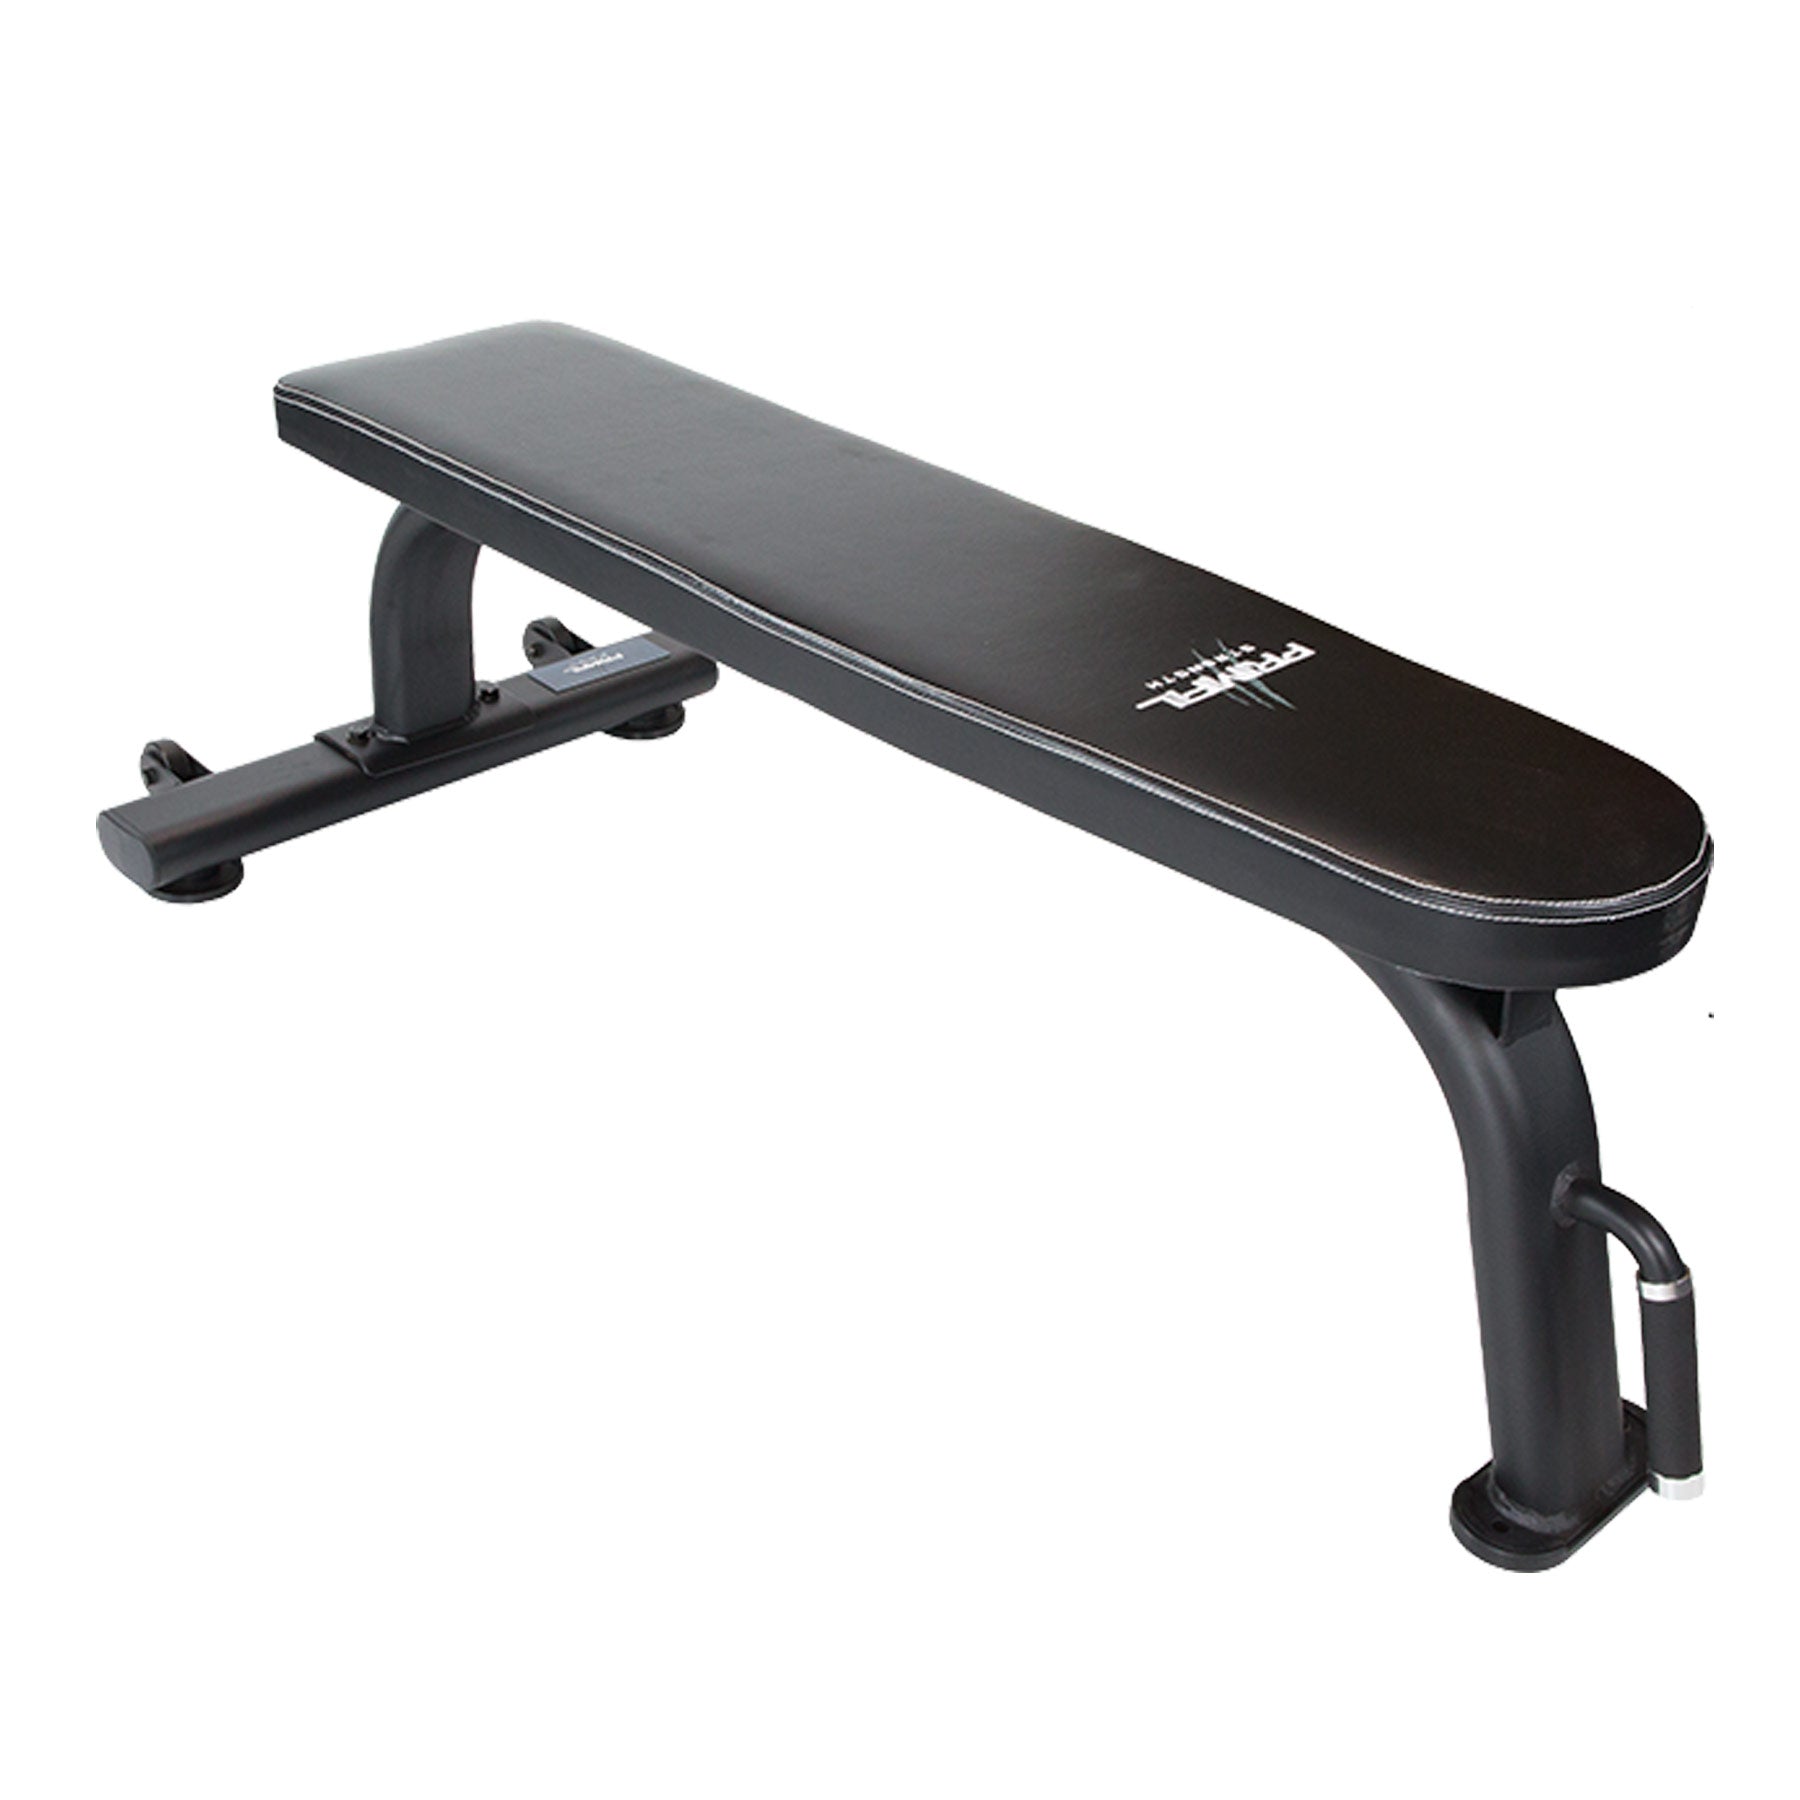 a black flat commercial weight bench